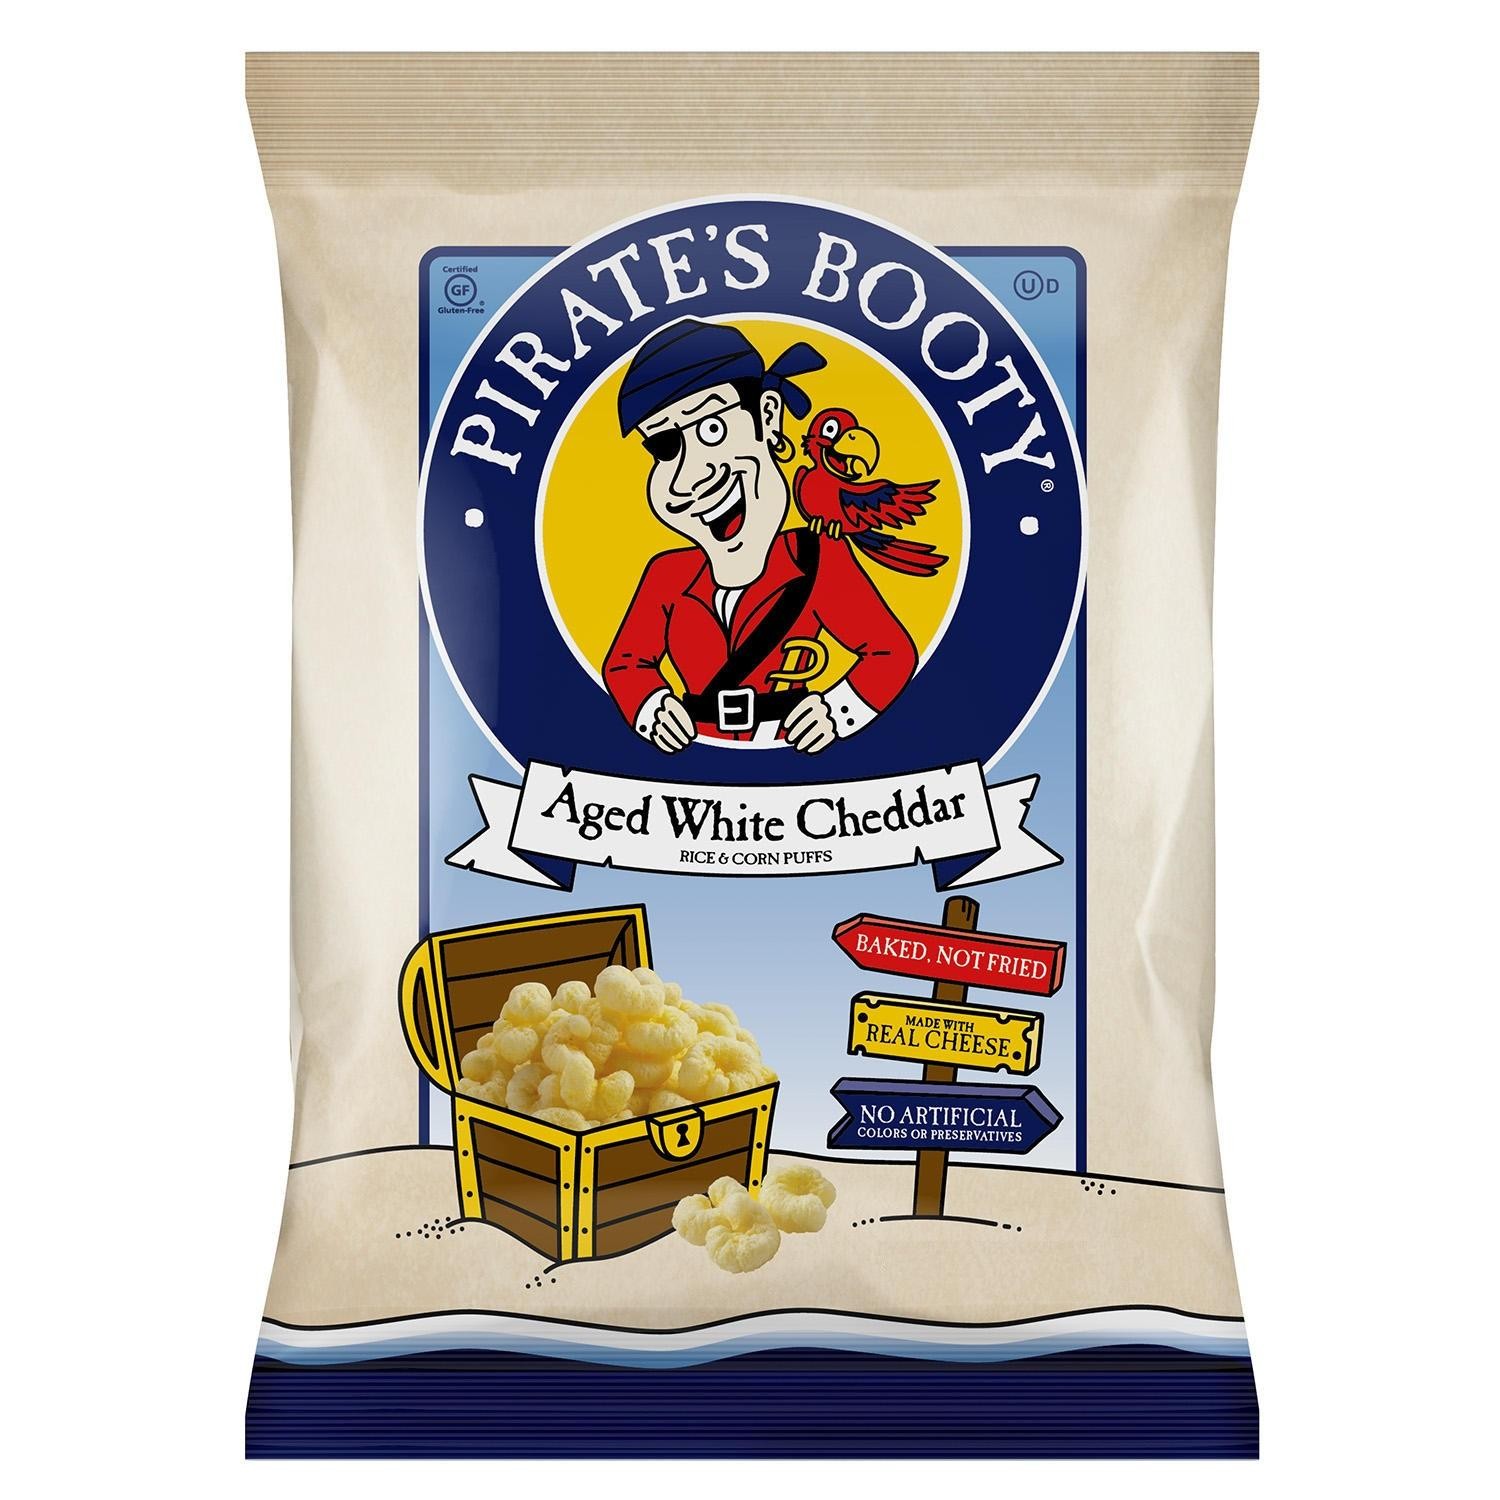 Pirate's Booty, Aged White Cheddar, 1-Ounce Bags (Pack of 24)